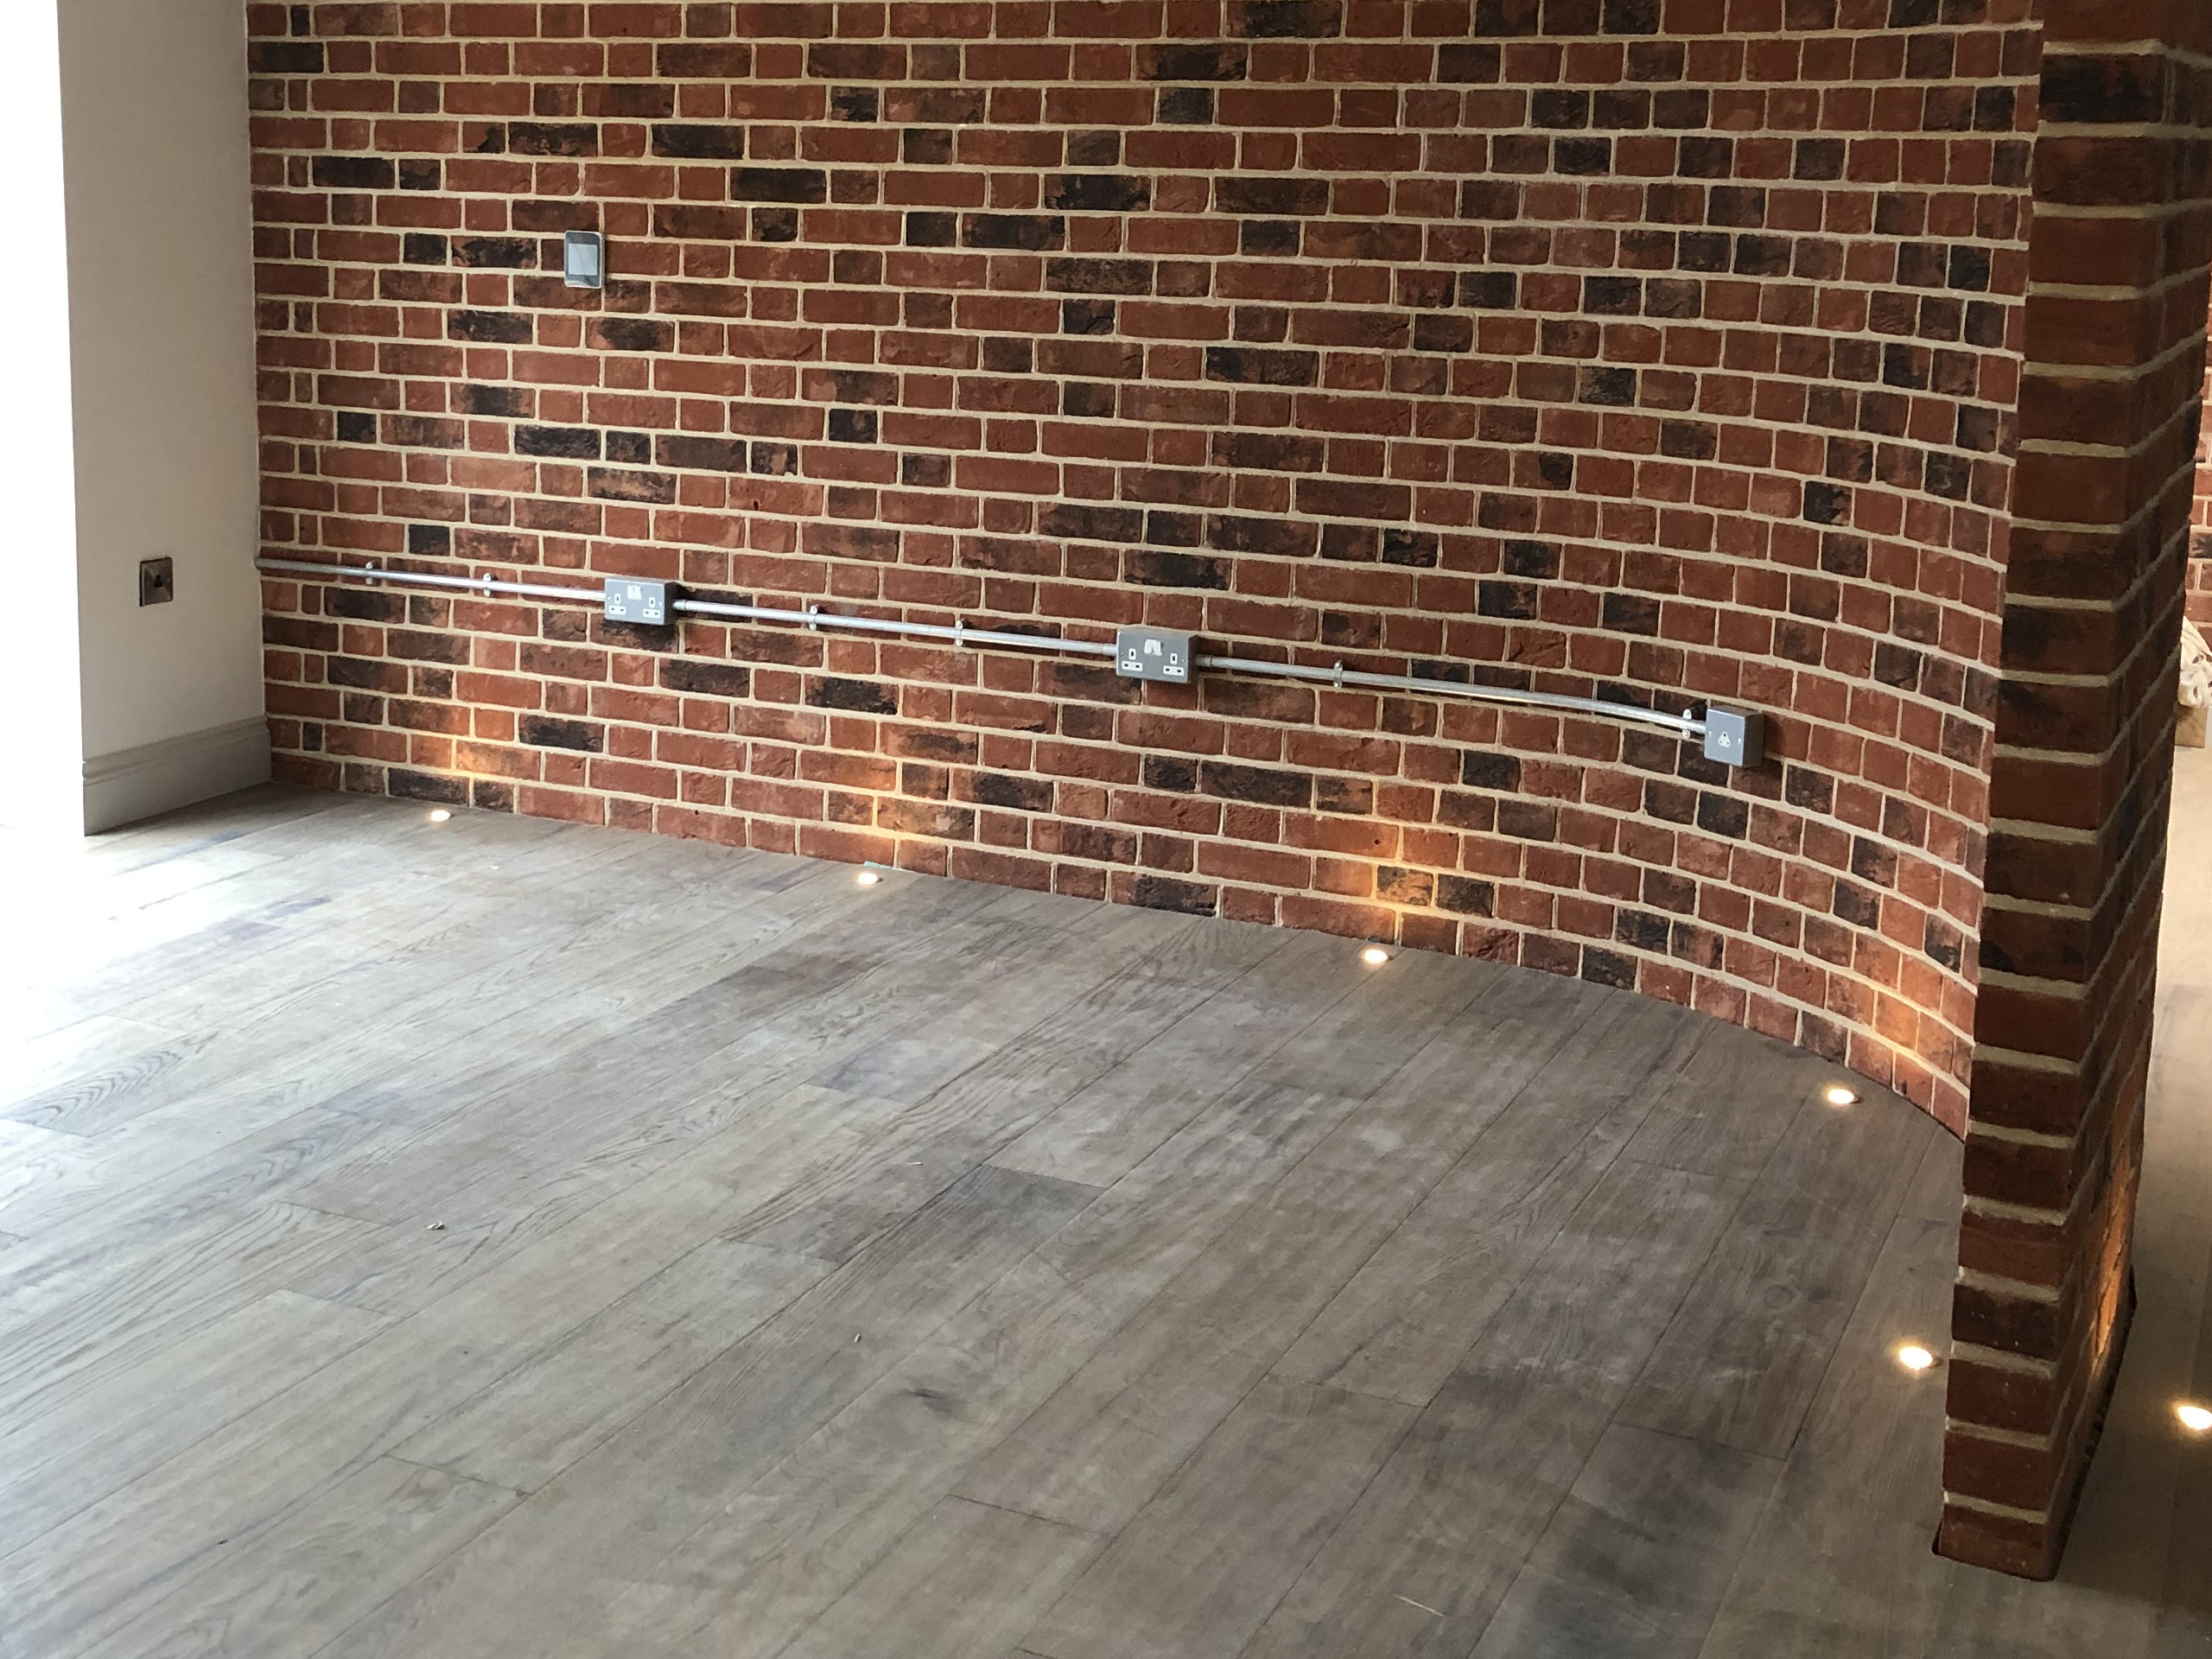 Floor spot uplighters installed by Kimberley Electrical Services